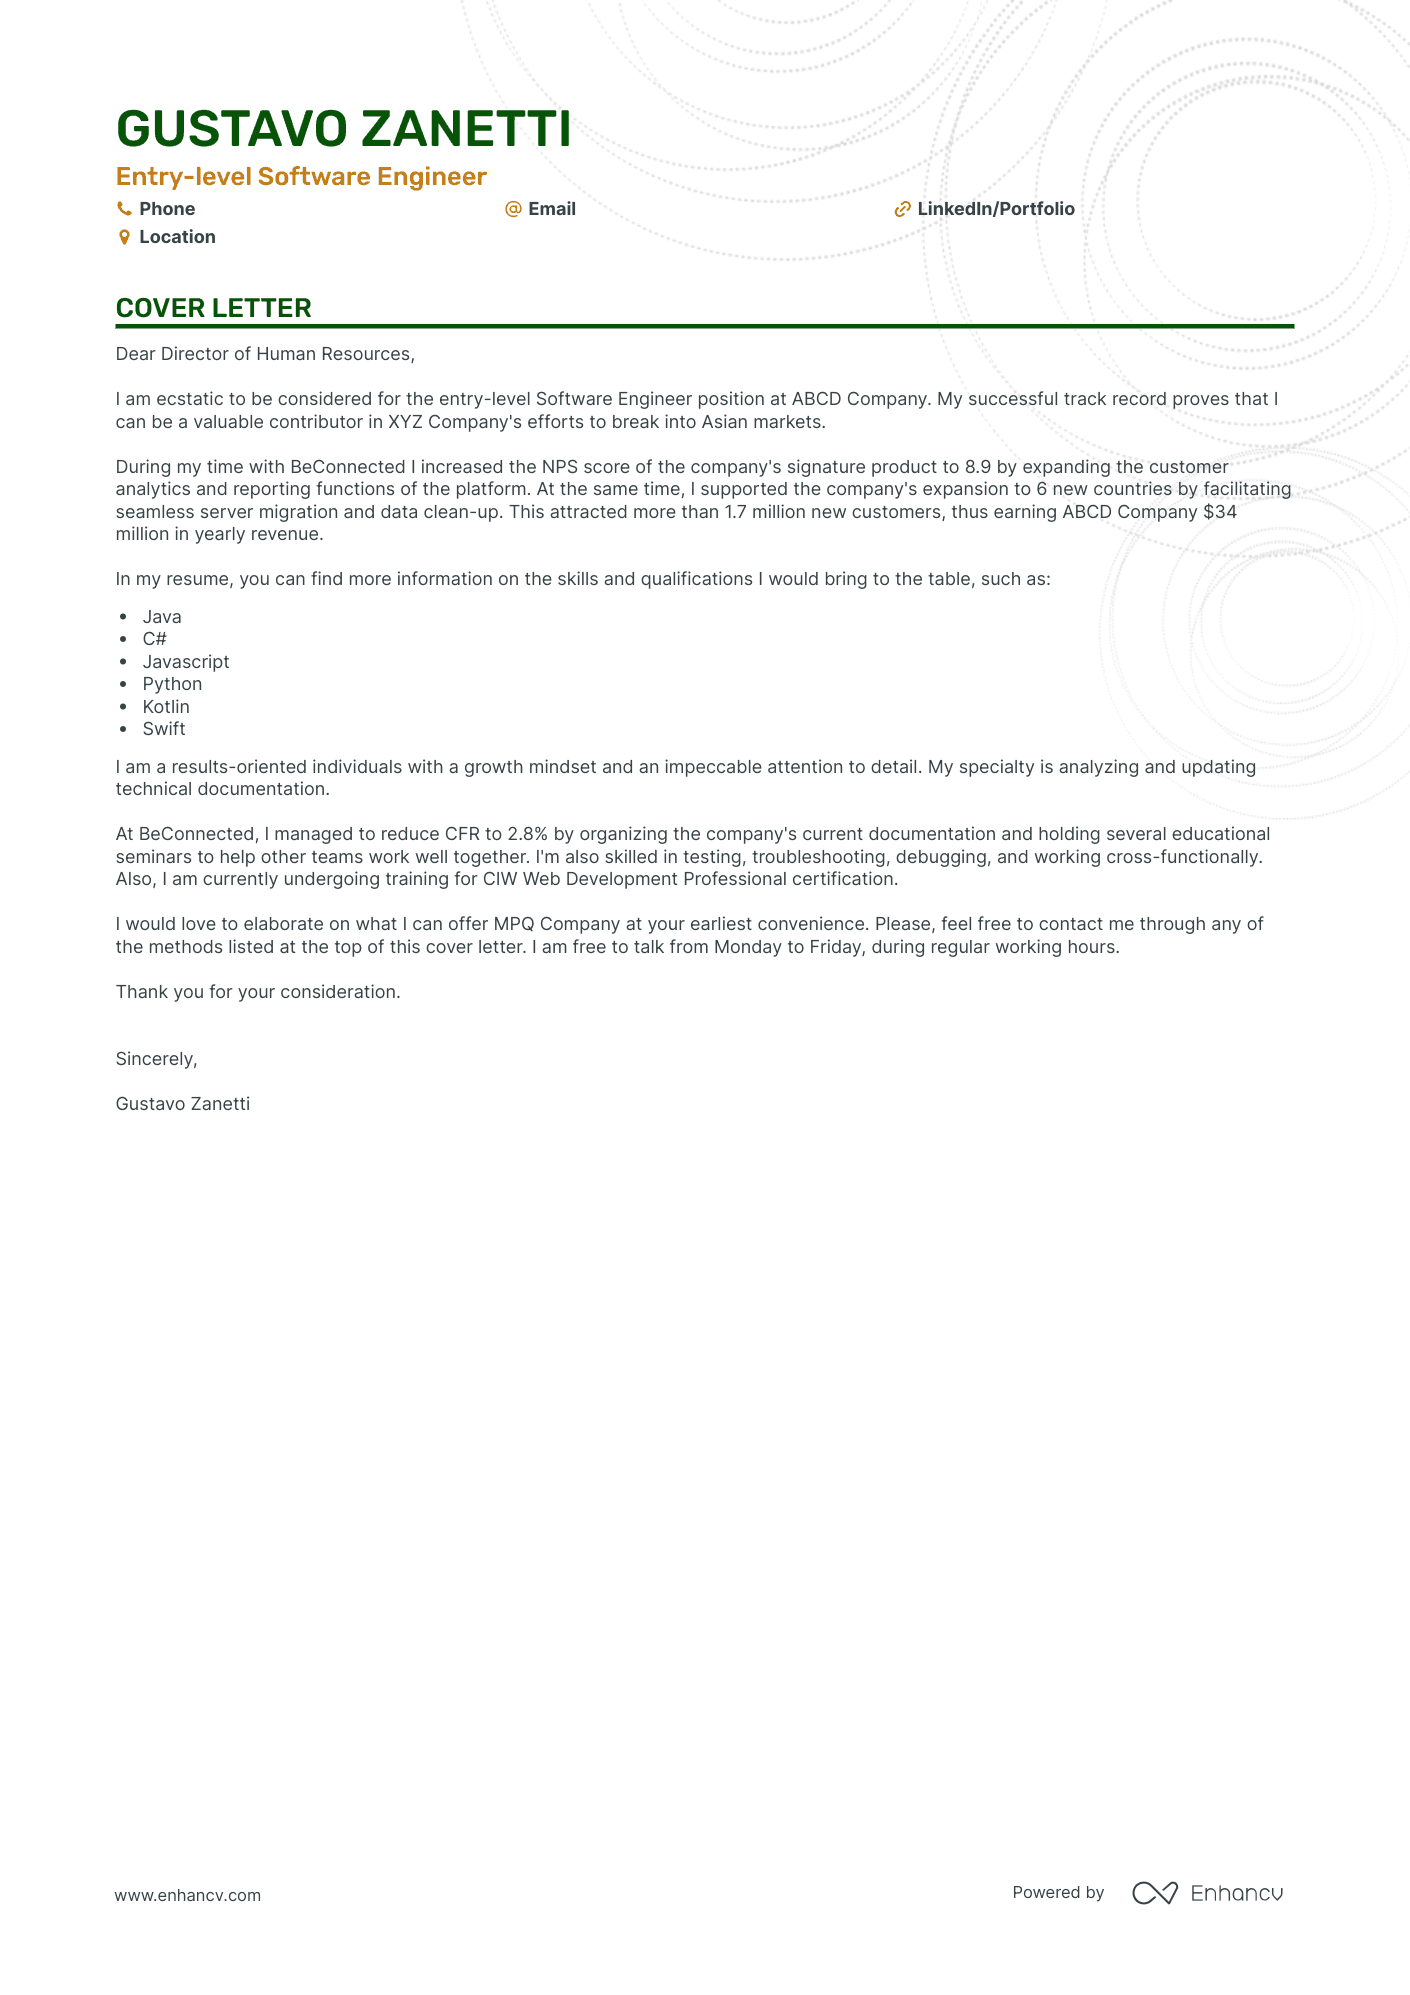 Entry level software engineer cover letter